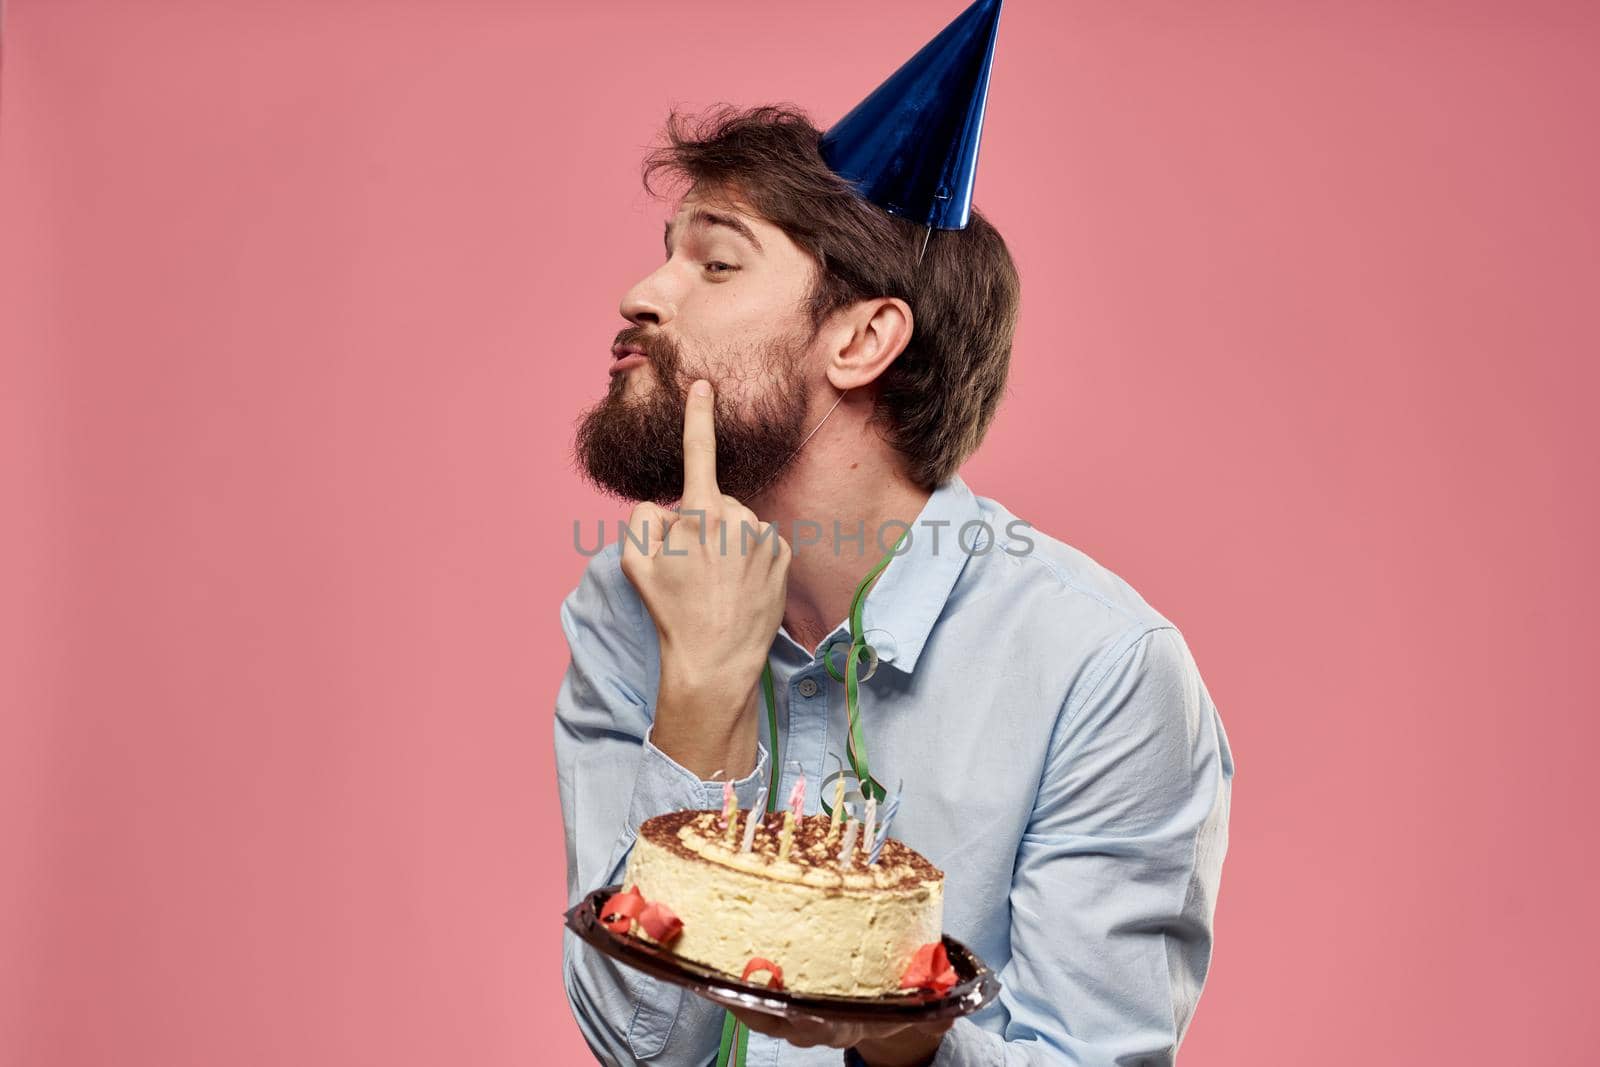 bearded man with cake on pink background emotions cropped view by SHOTPRIME